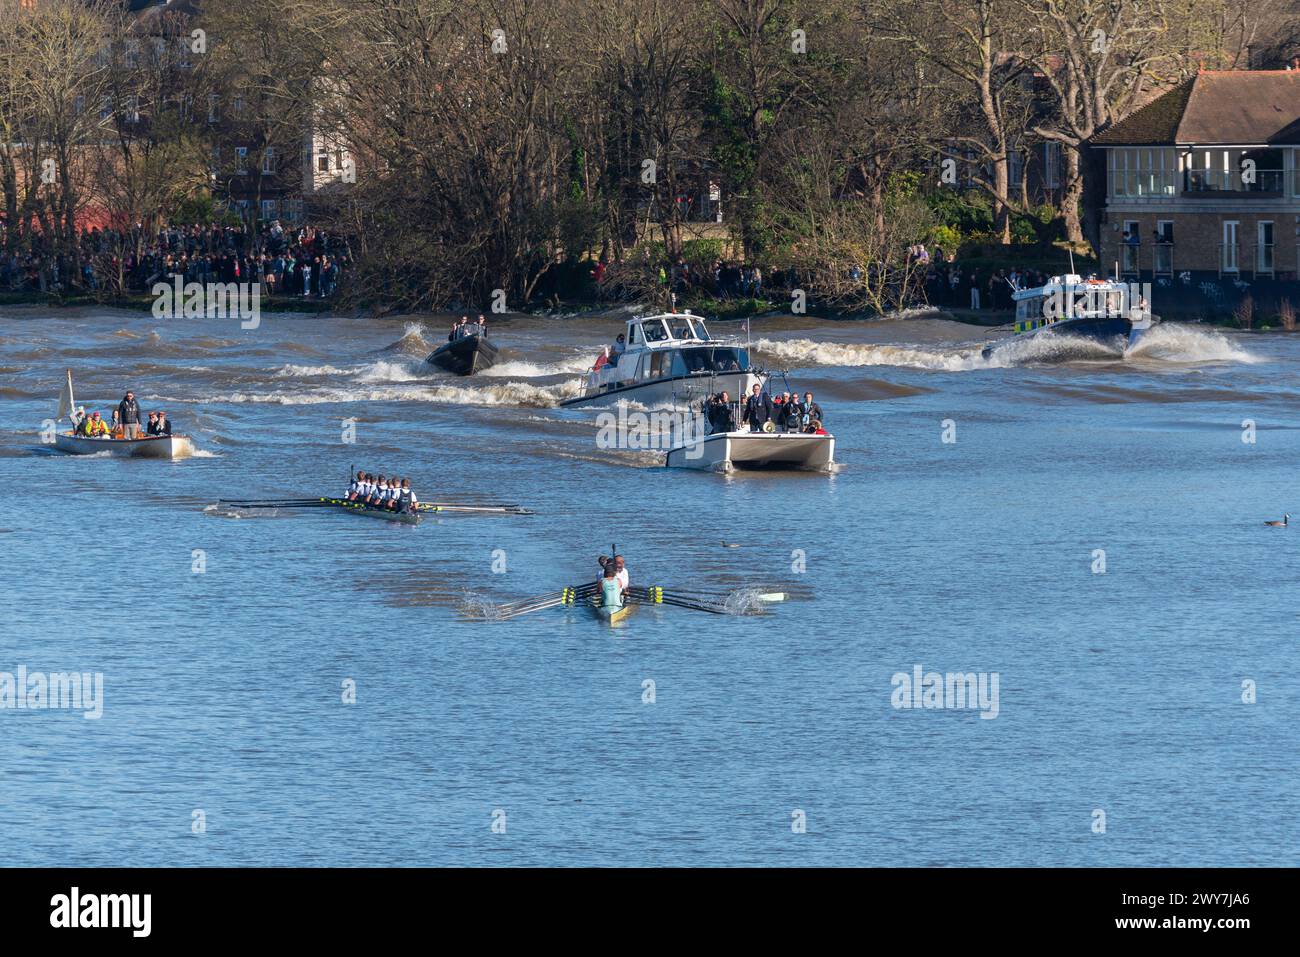 University Boat Race racing through Mortlake just before Chiswick Bridge on the River Thames. Cambridge leading Oxford boat followed by chase boats Stock Photo